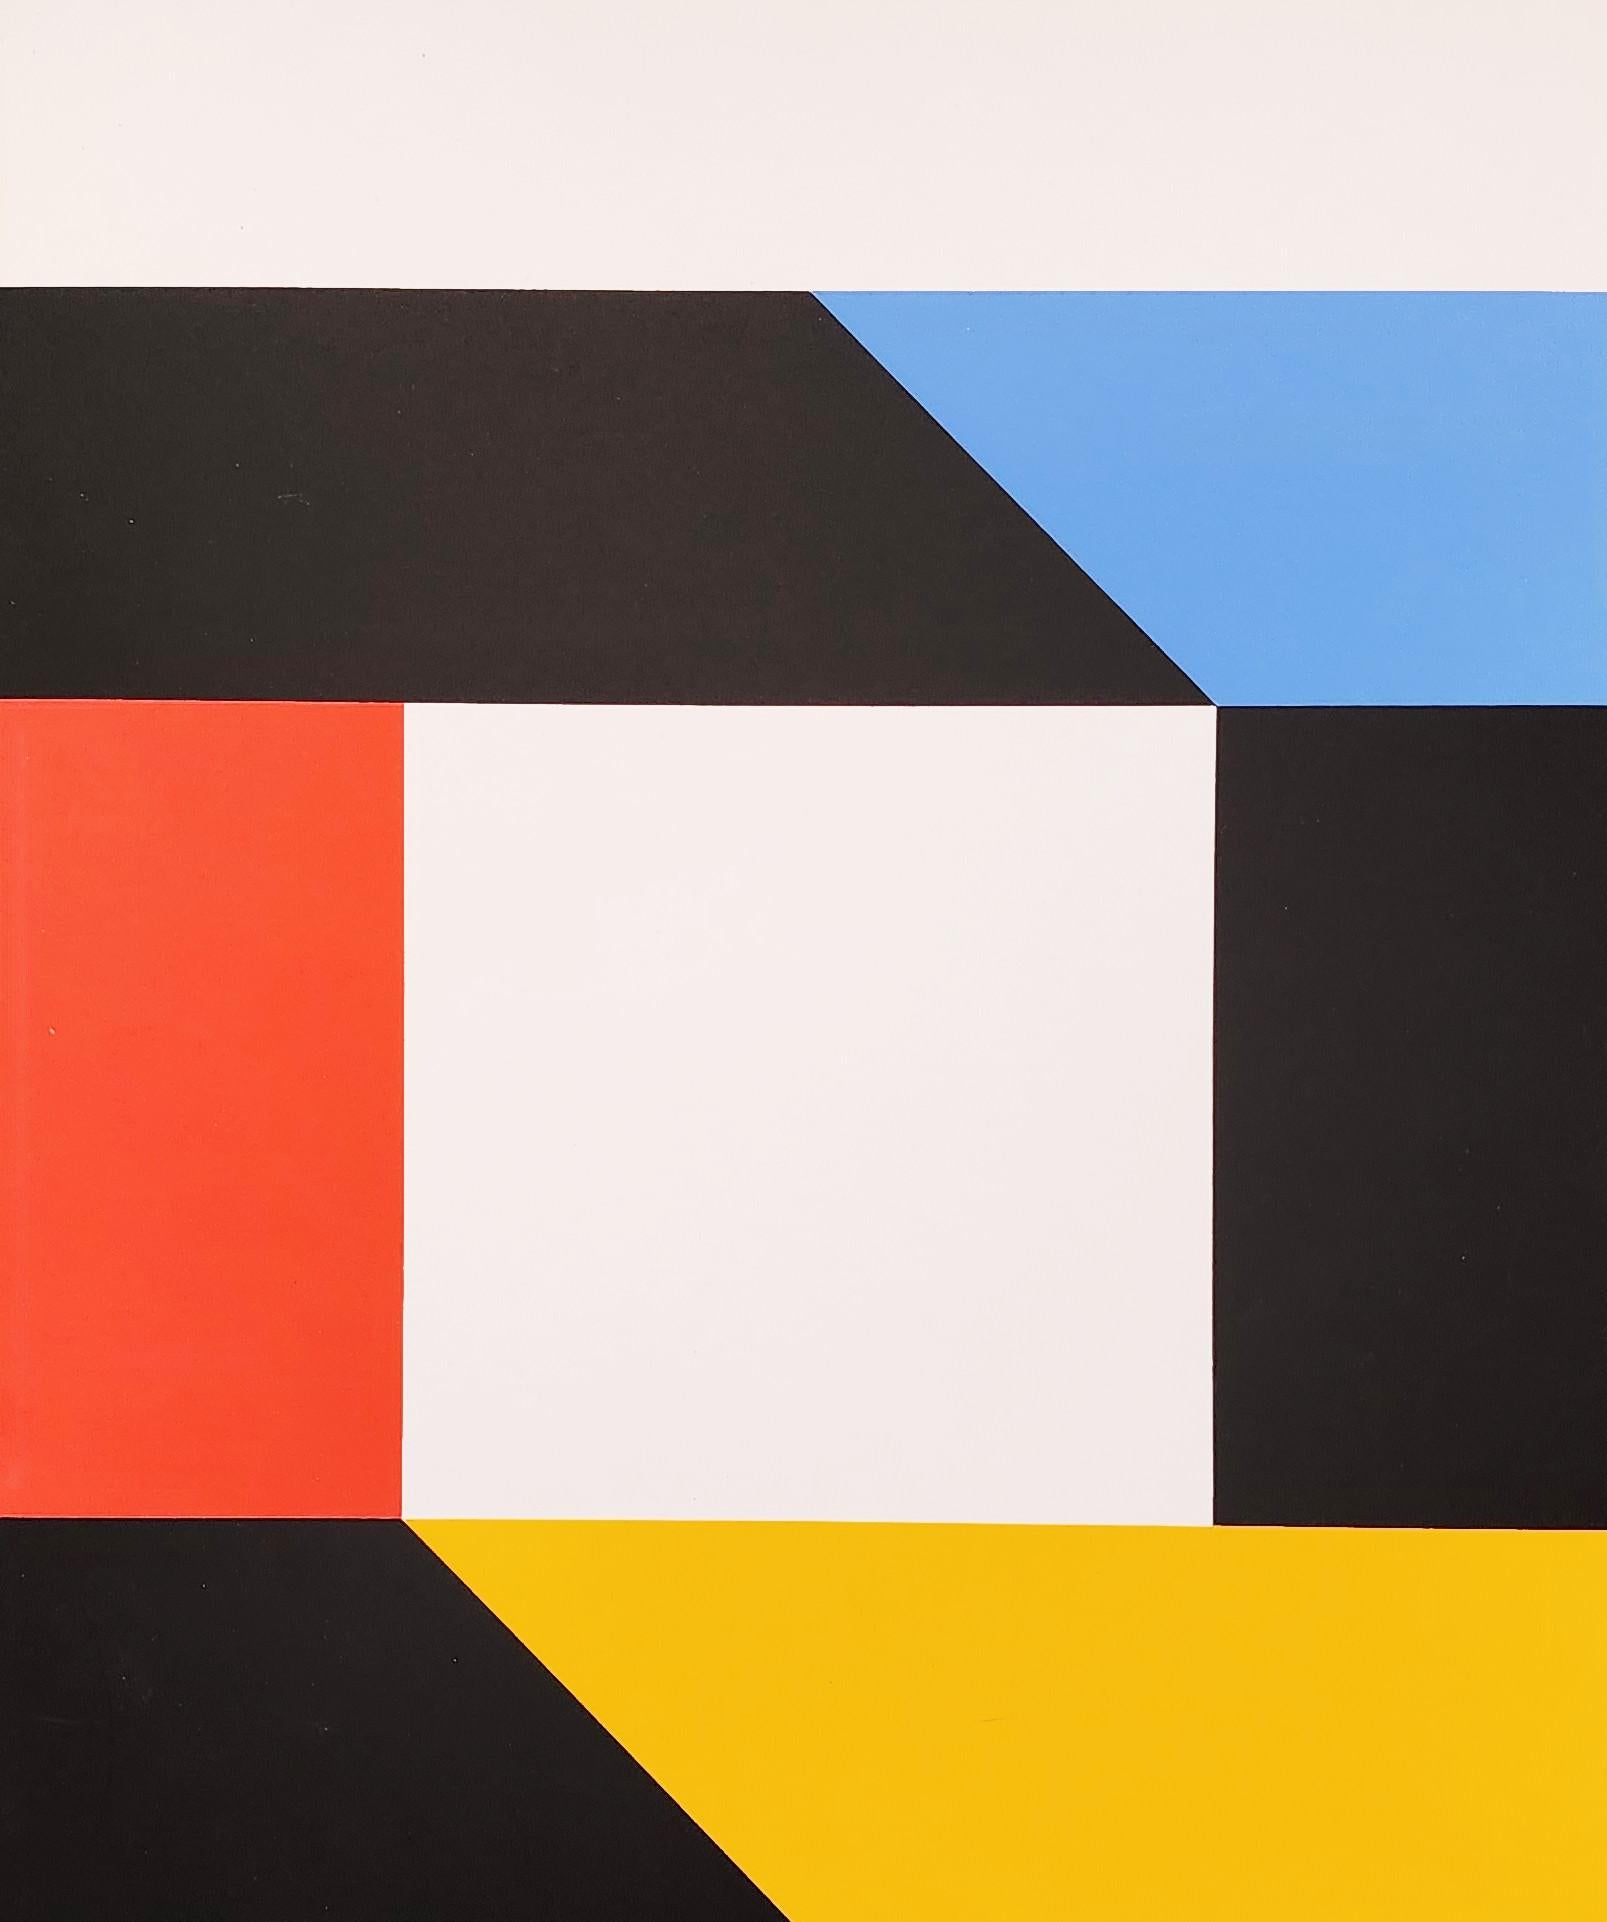 Untitled (Geometric Abstraction Minimalism) (~50% OFF LIST PRICE - LIMITED TIME) - Print by Max Bill